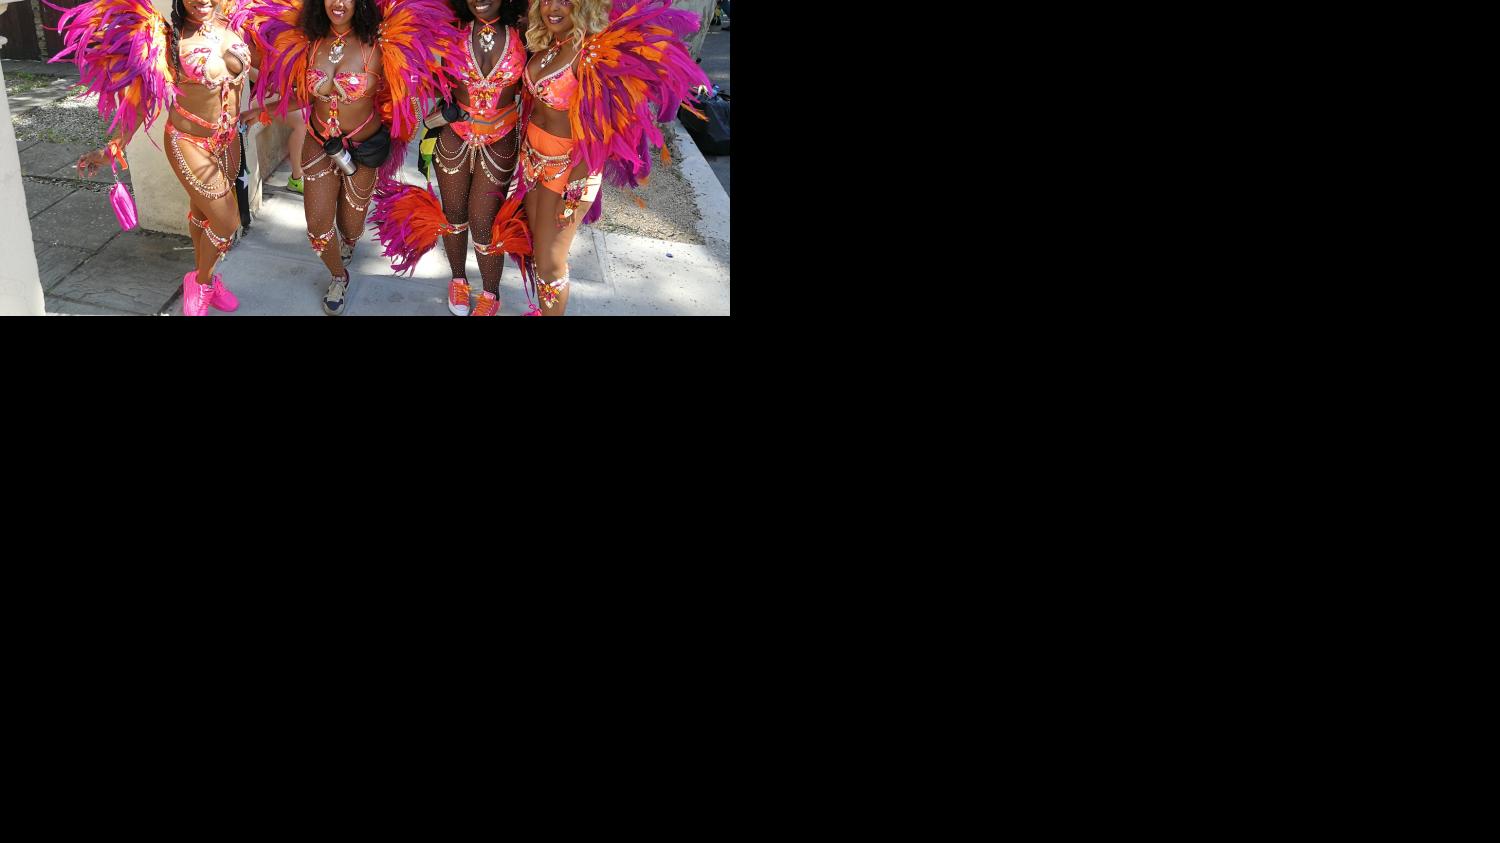 image of 4 women dressed up in typical notting hill carnival festival clothes, smiling.